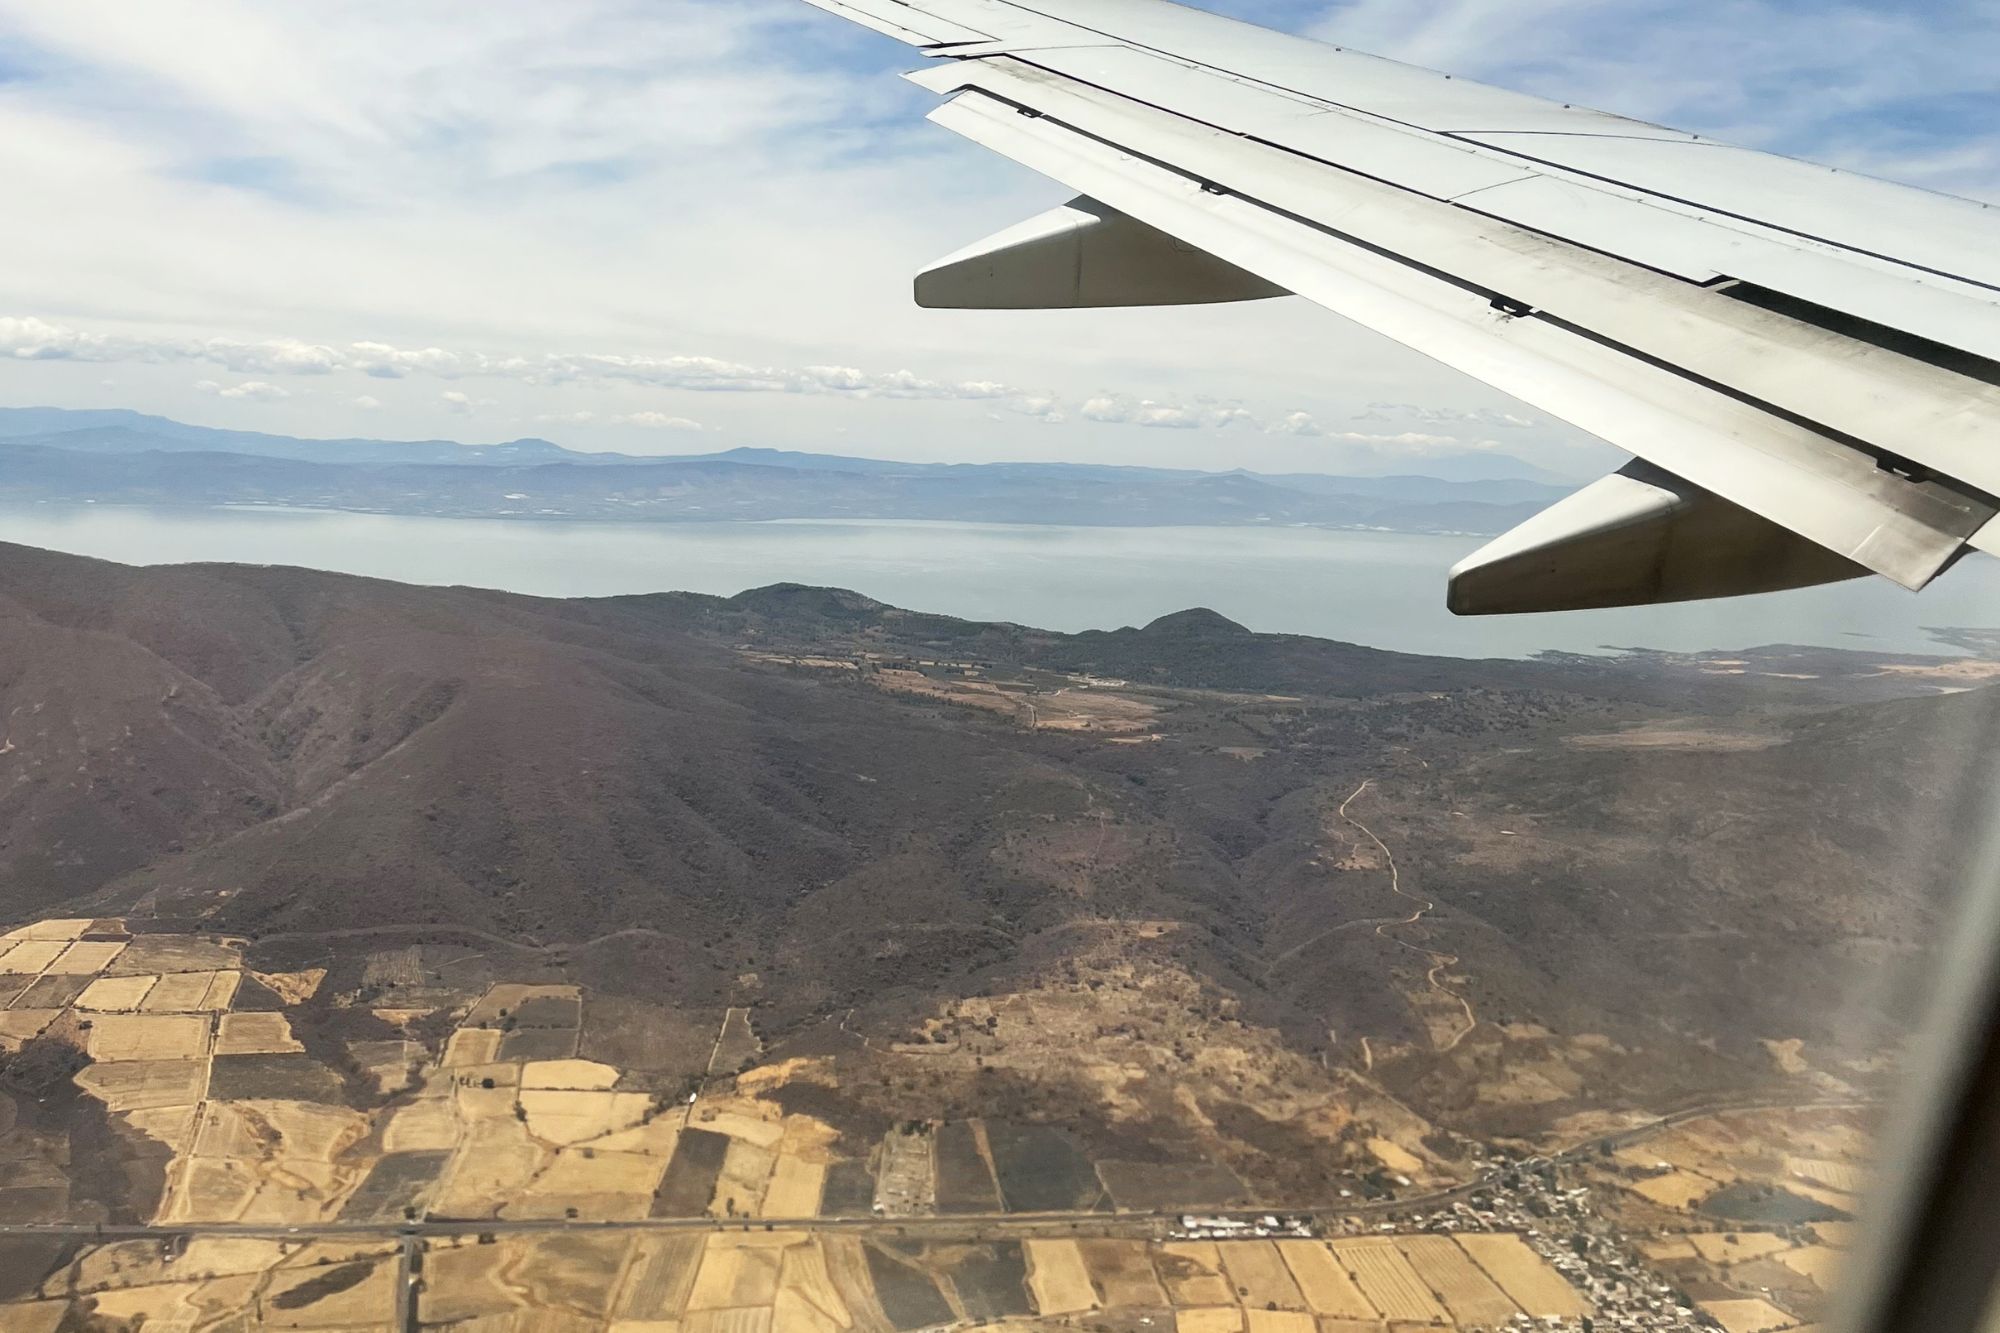 View of Lake Chapala from the plane